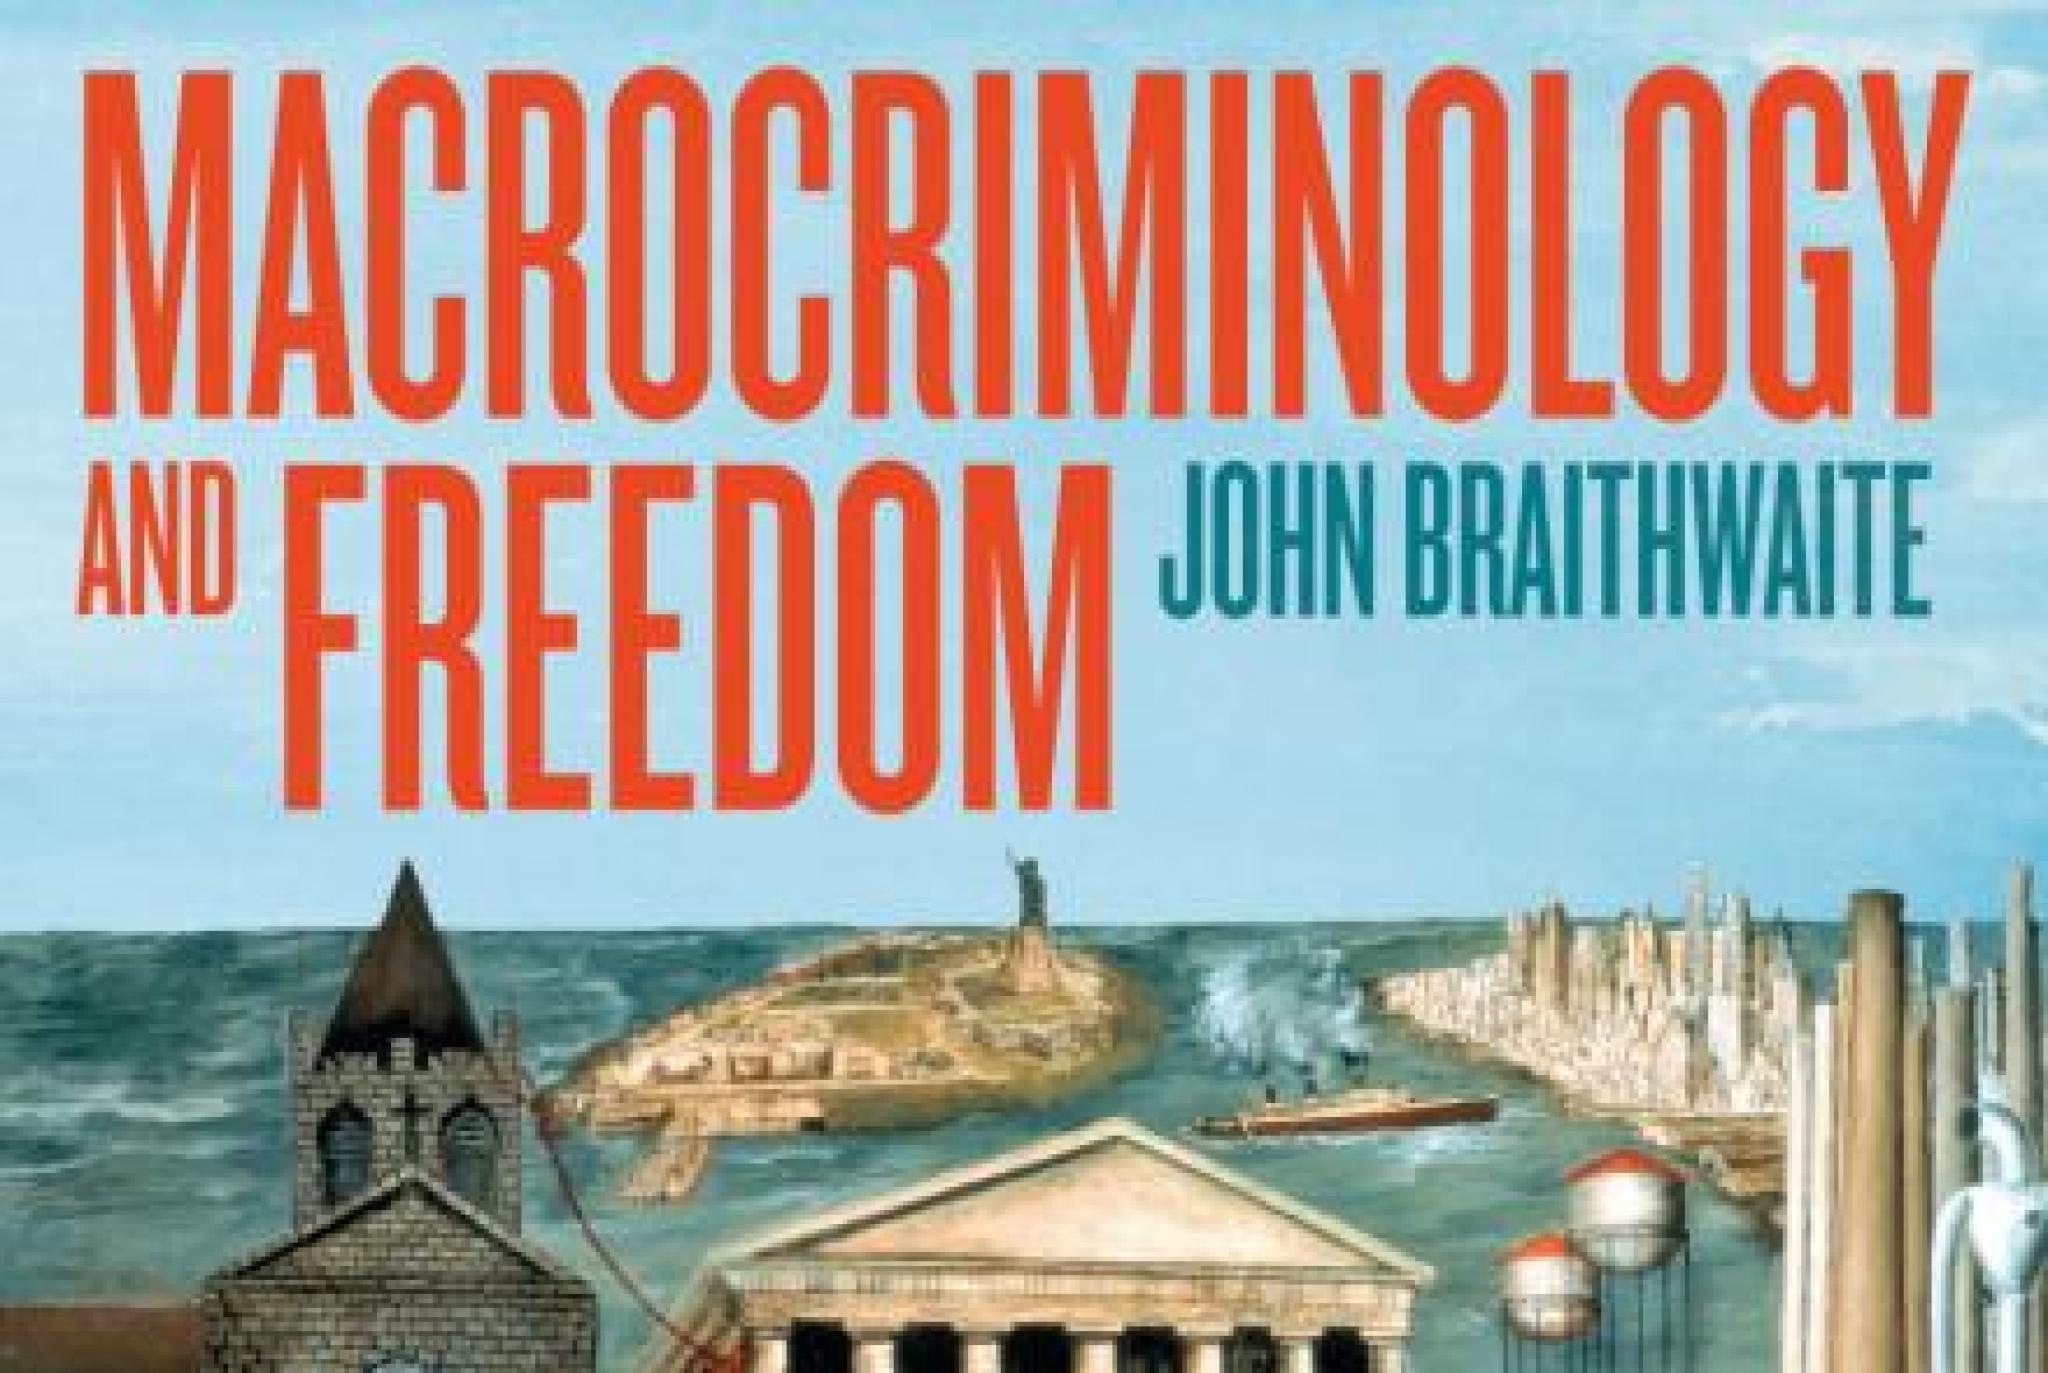 Image: Book cover, Macrocriminology and Freedom